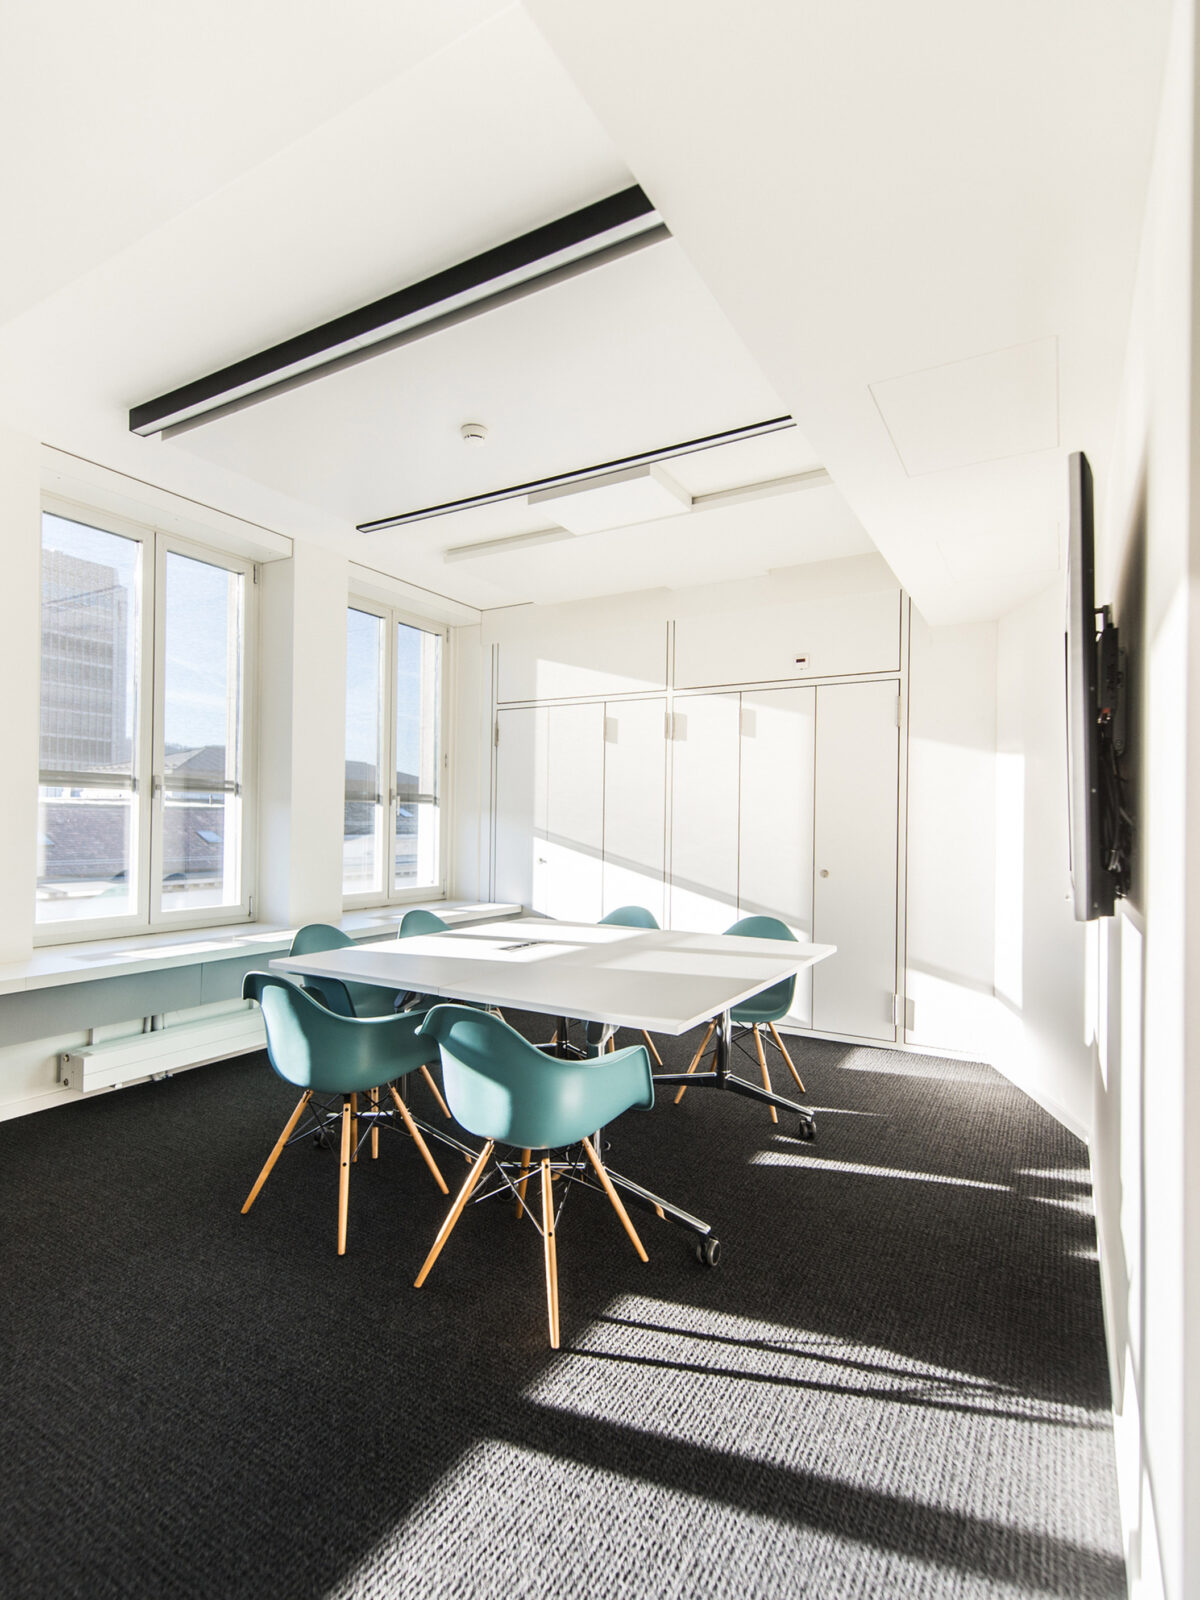 Minimalist conference room bathed in natural light, featuring a sleek white table, turquoise Eames-style chairs, dark textured carpeting, and a discreet ceiling-mounted projector.